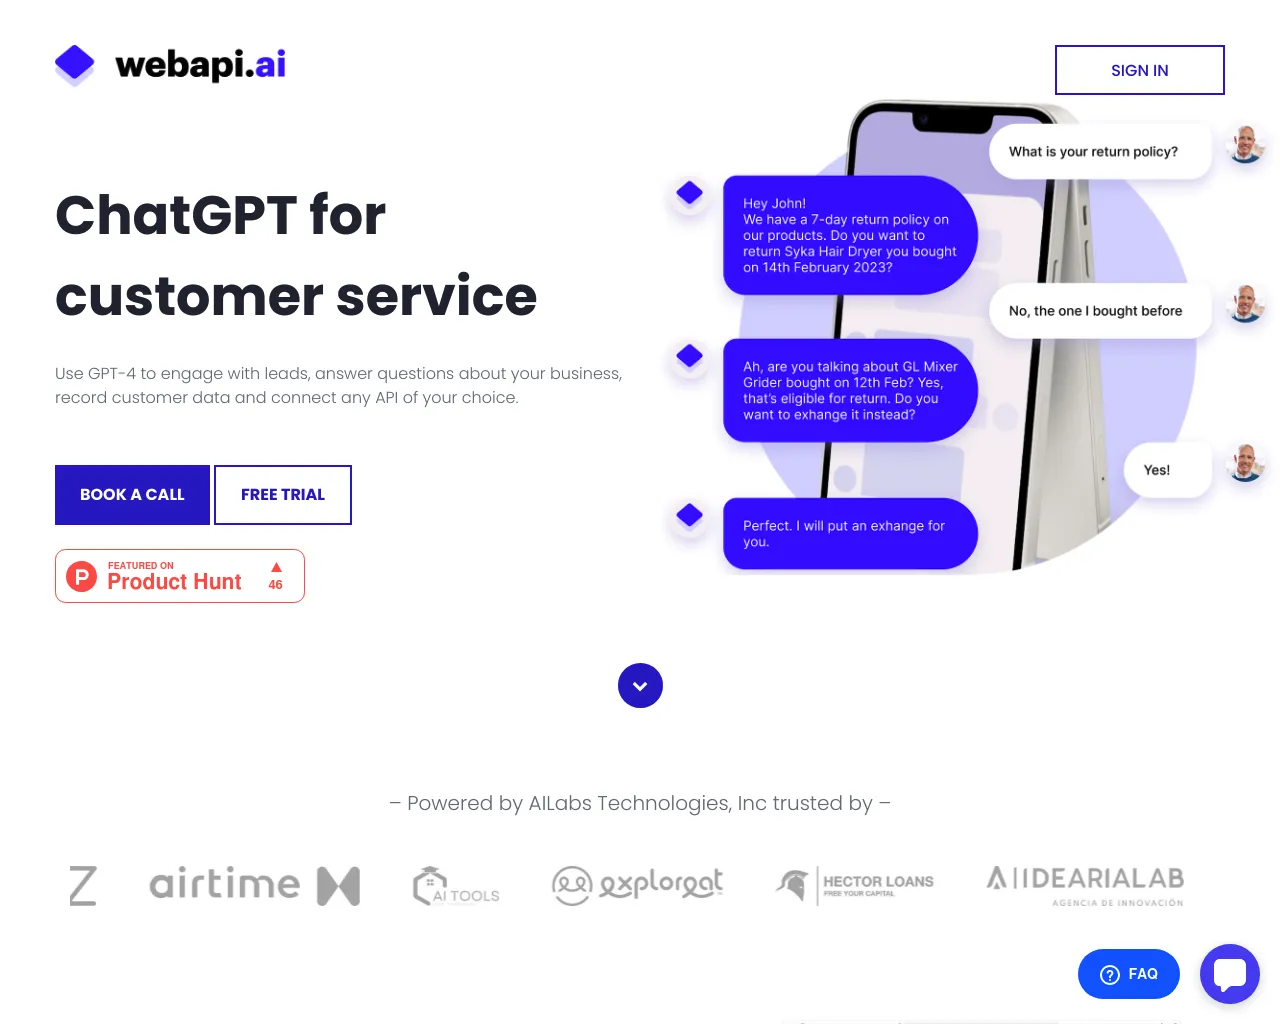 ChatGPT for Customer Service